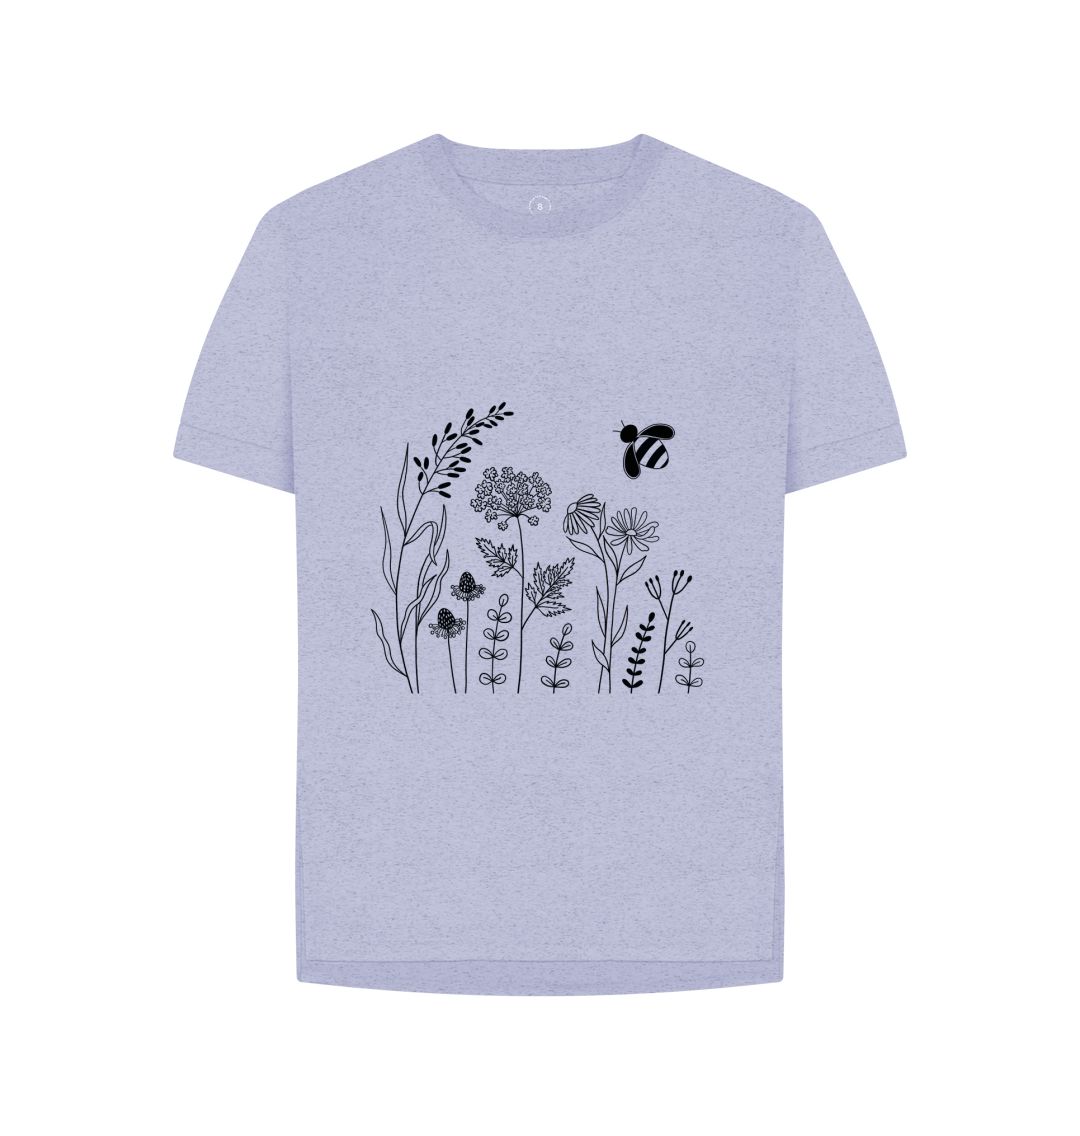 Lavender Wildflower meadow Recycled Cotton relaxed fit ladies Tee